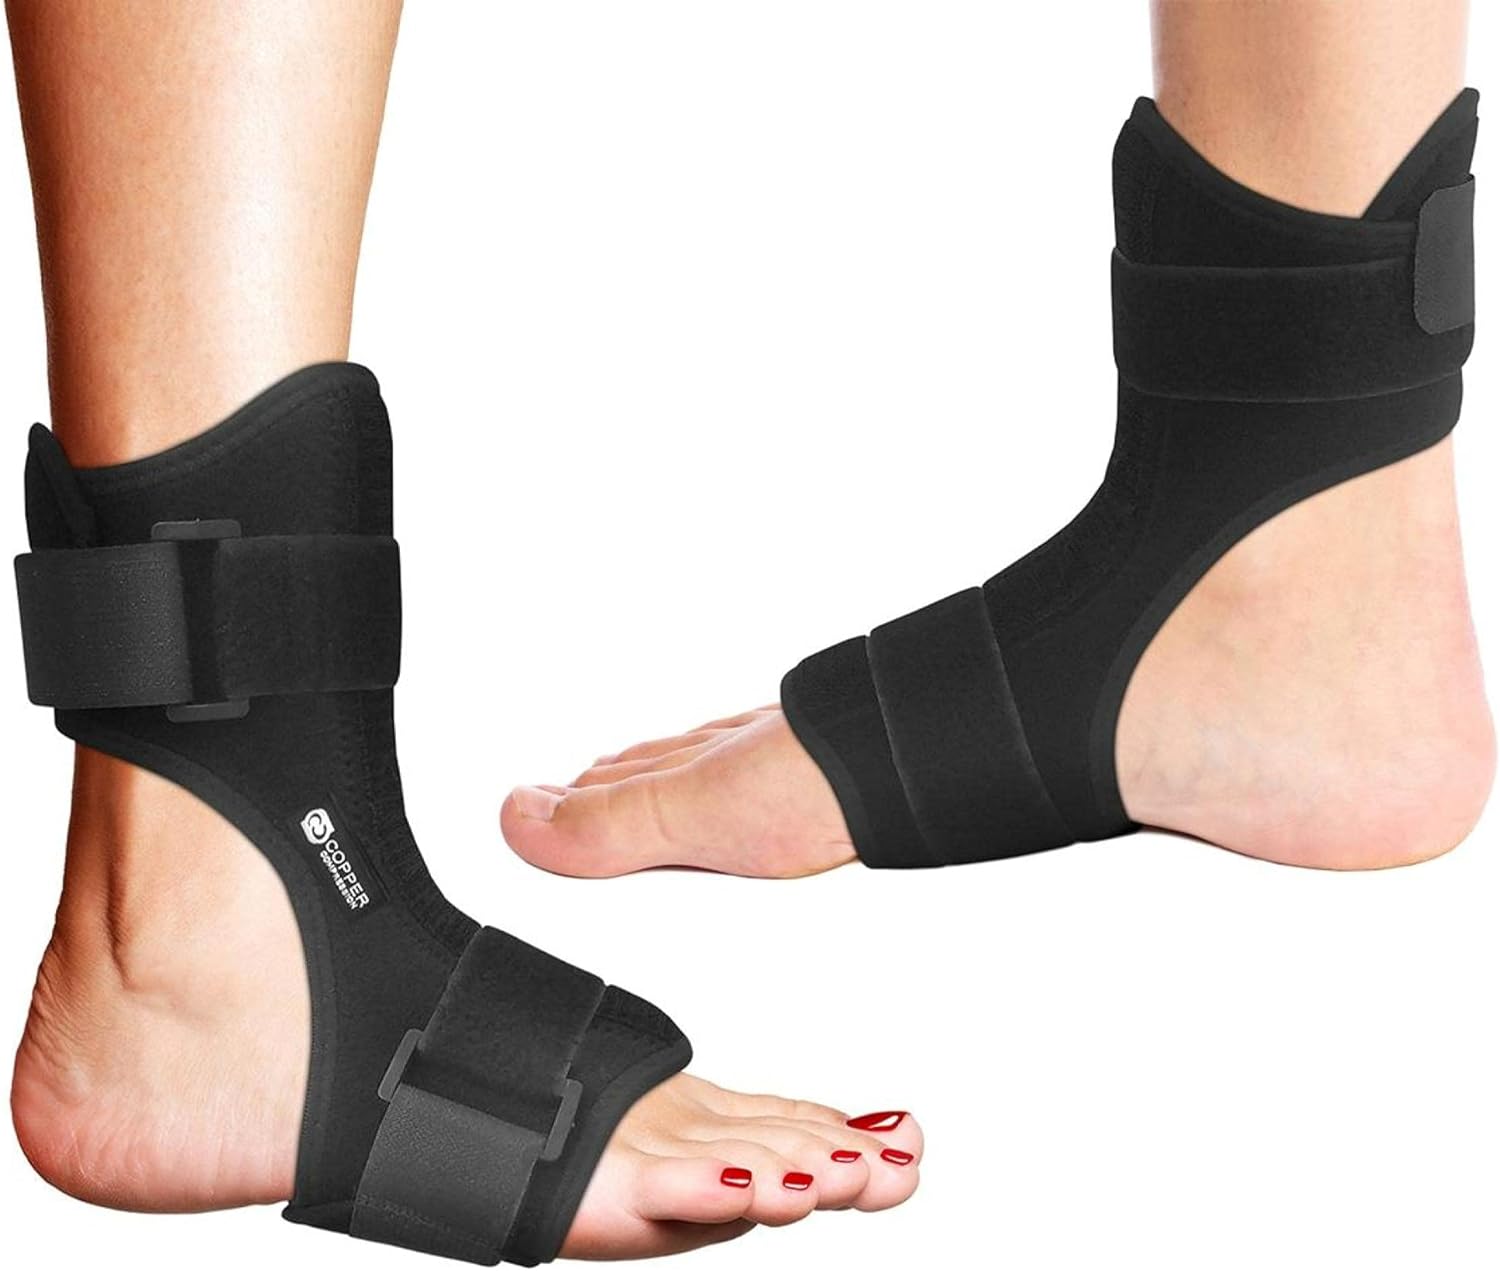 Featured Image for Copper Compression Plantar Fasciitis Night Splint – Drop Foot Orthopedic Brace & Dorsal Night Splint for Recovery, Tendonitis, Arthritis – Fits Right or Left Foot – Fully Adjustable